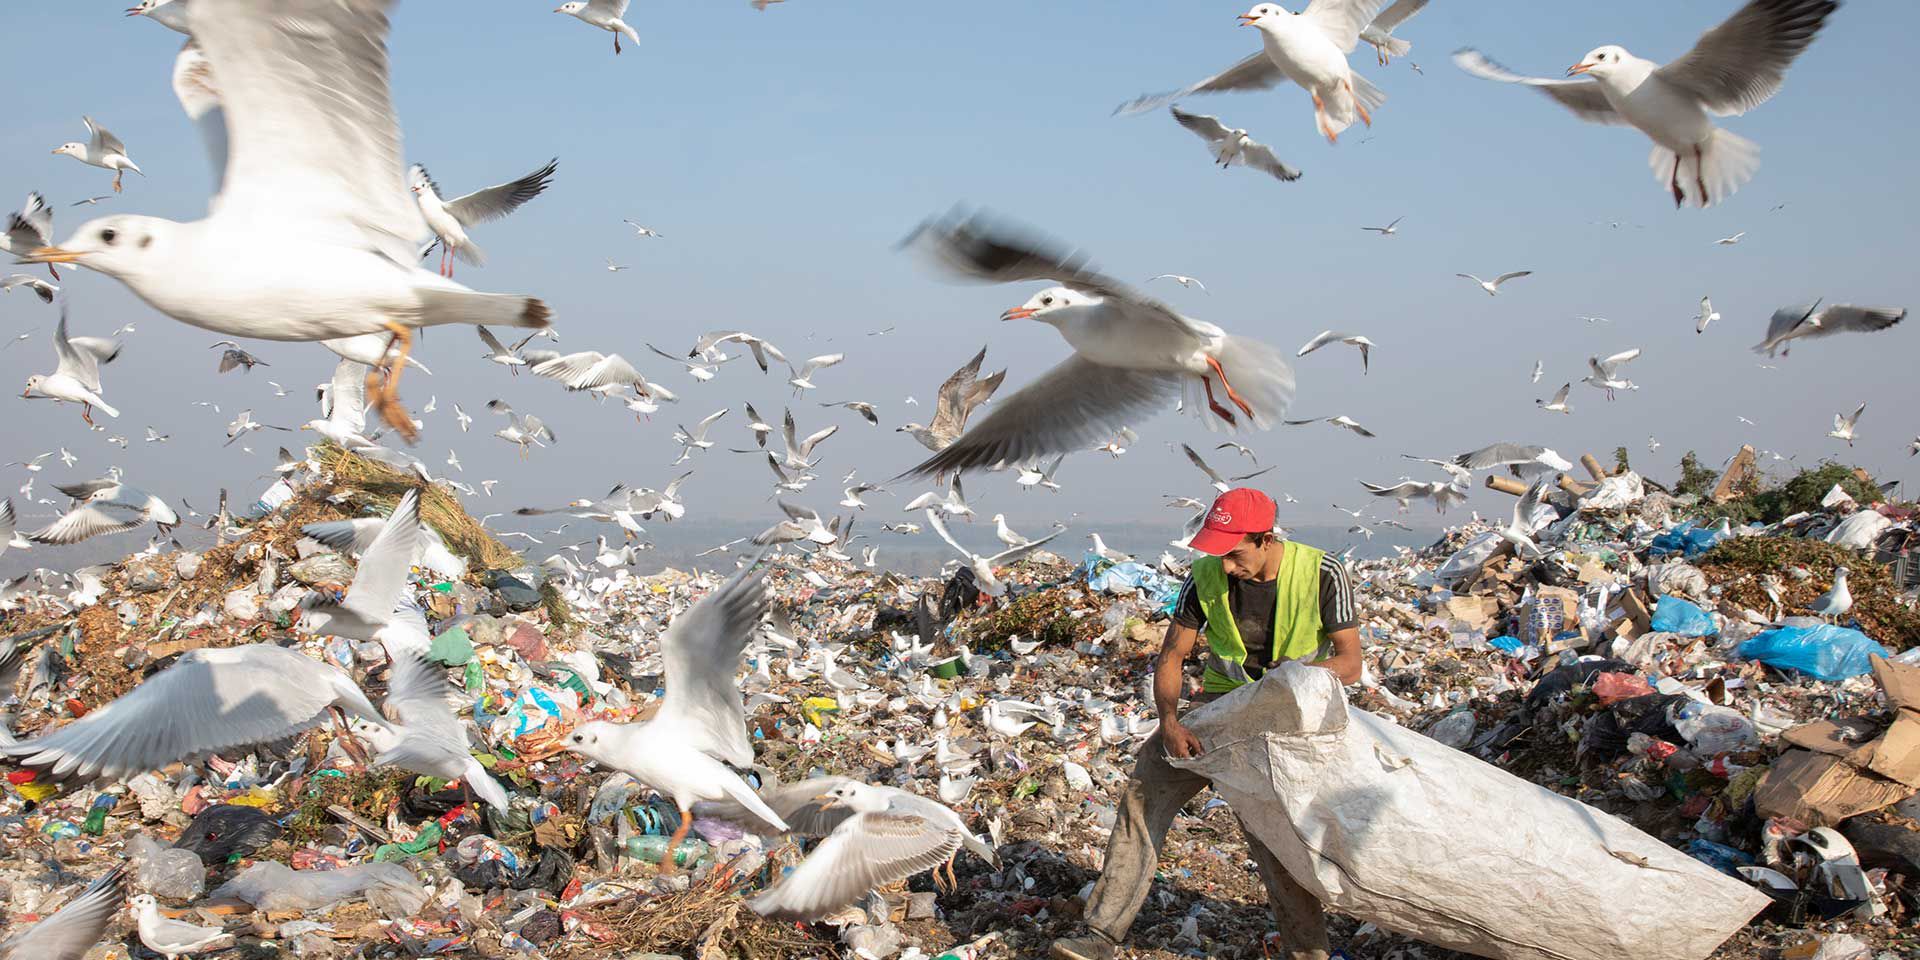 Waste pickers work long days diligently collecting recyclable material at the Vin?a Landfill in Belgrade, Serbia, on October 28, 2019. Vin?a Landfill is one of the largest uncontrolled trash dumps in Europe. The city of Belgrade disposes its medical waste, construction waste, and city garbage in the dump. It is currently slowly sliding towards the Danube River with leachate water that is filled with high levels of metal. Photo © Dominic Chavez/International Finance Corporation